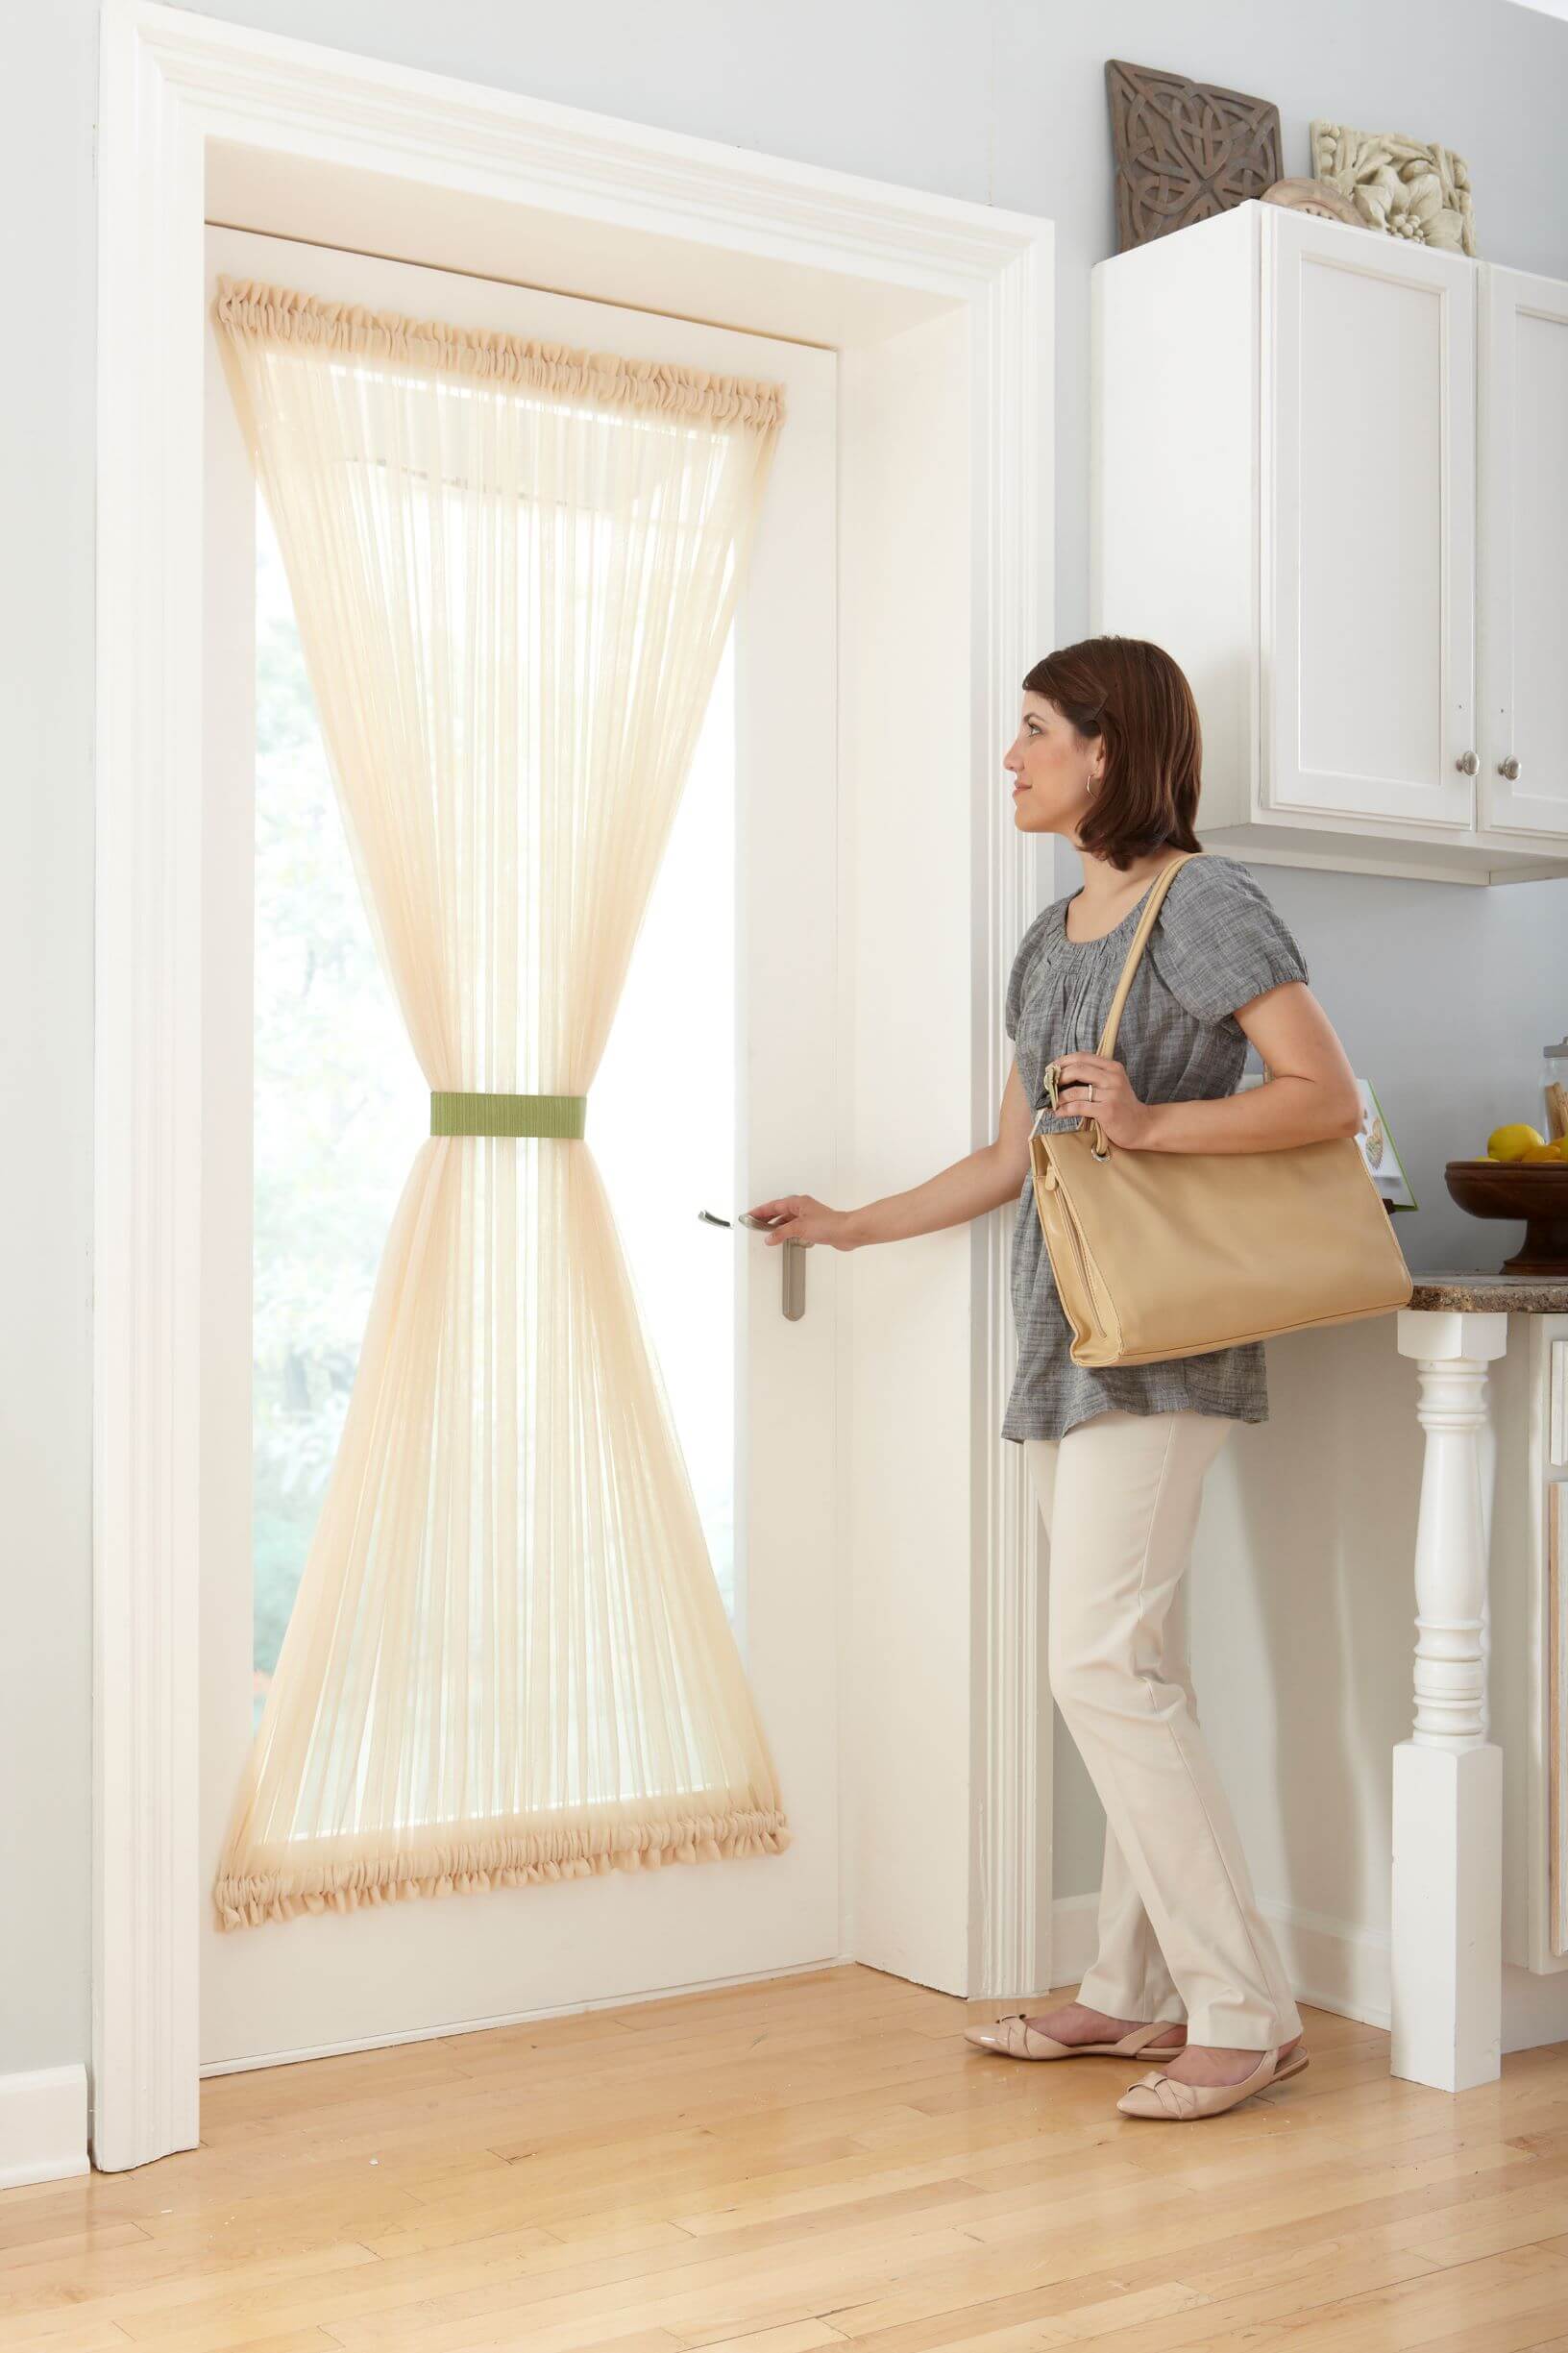 Sash curtains are window treatments that are hung between two rods and pulled tight over a window. 